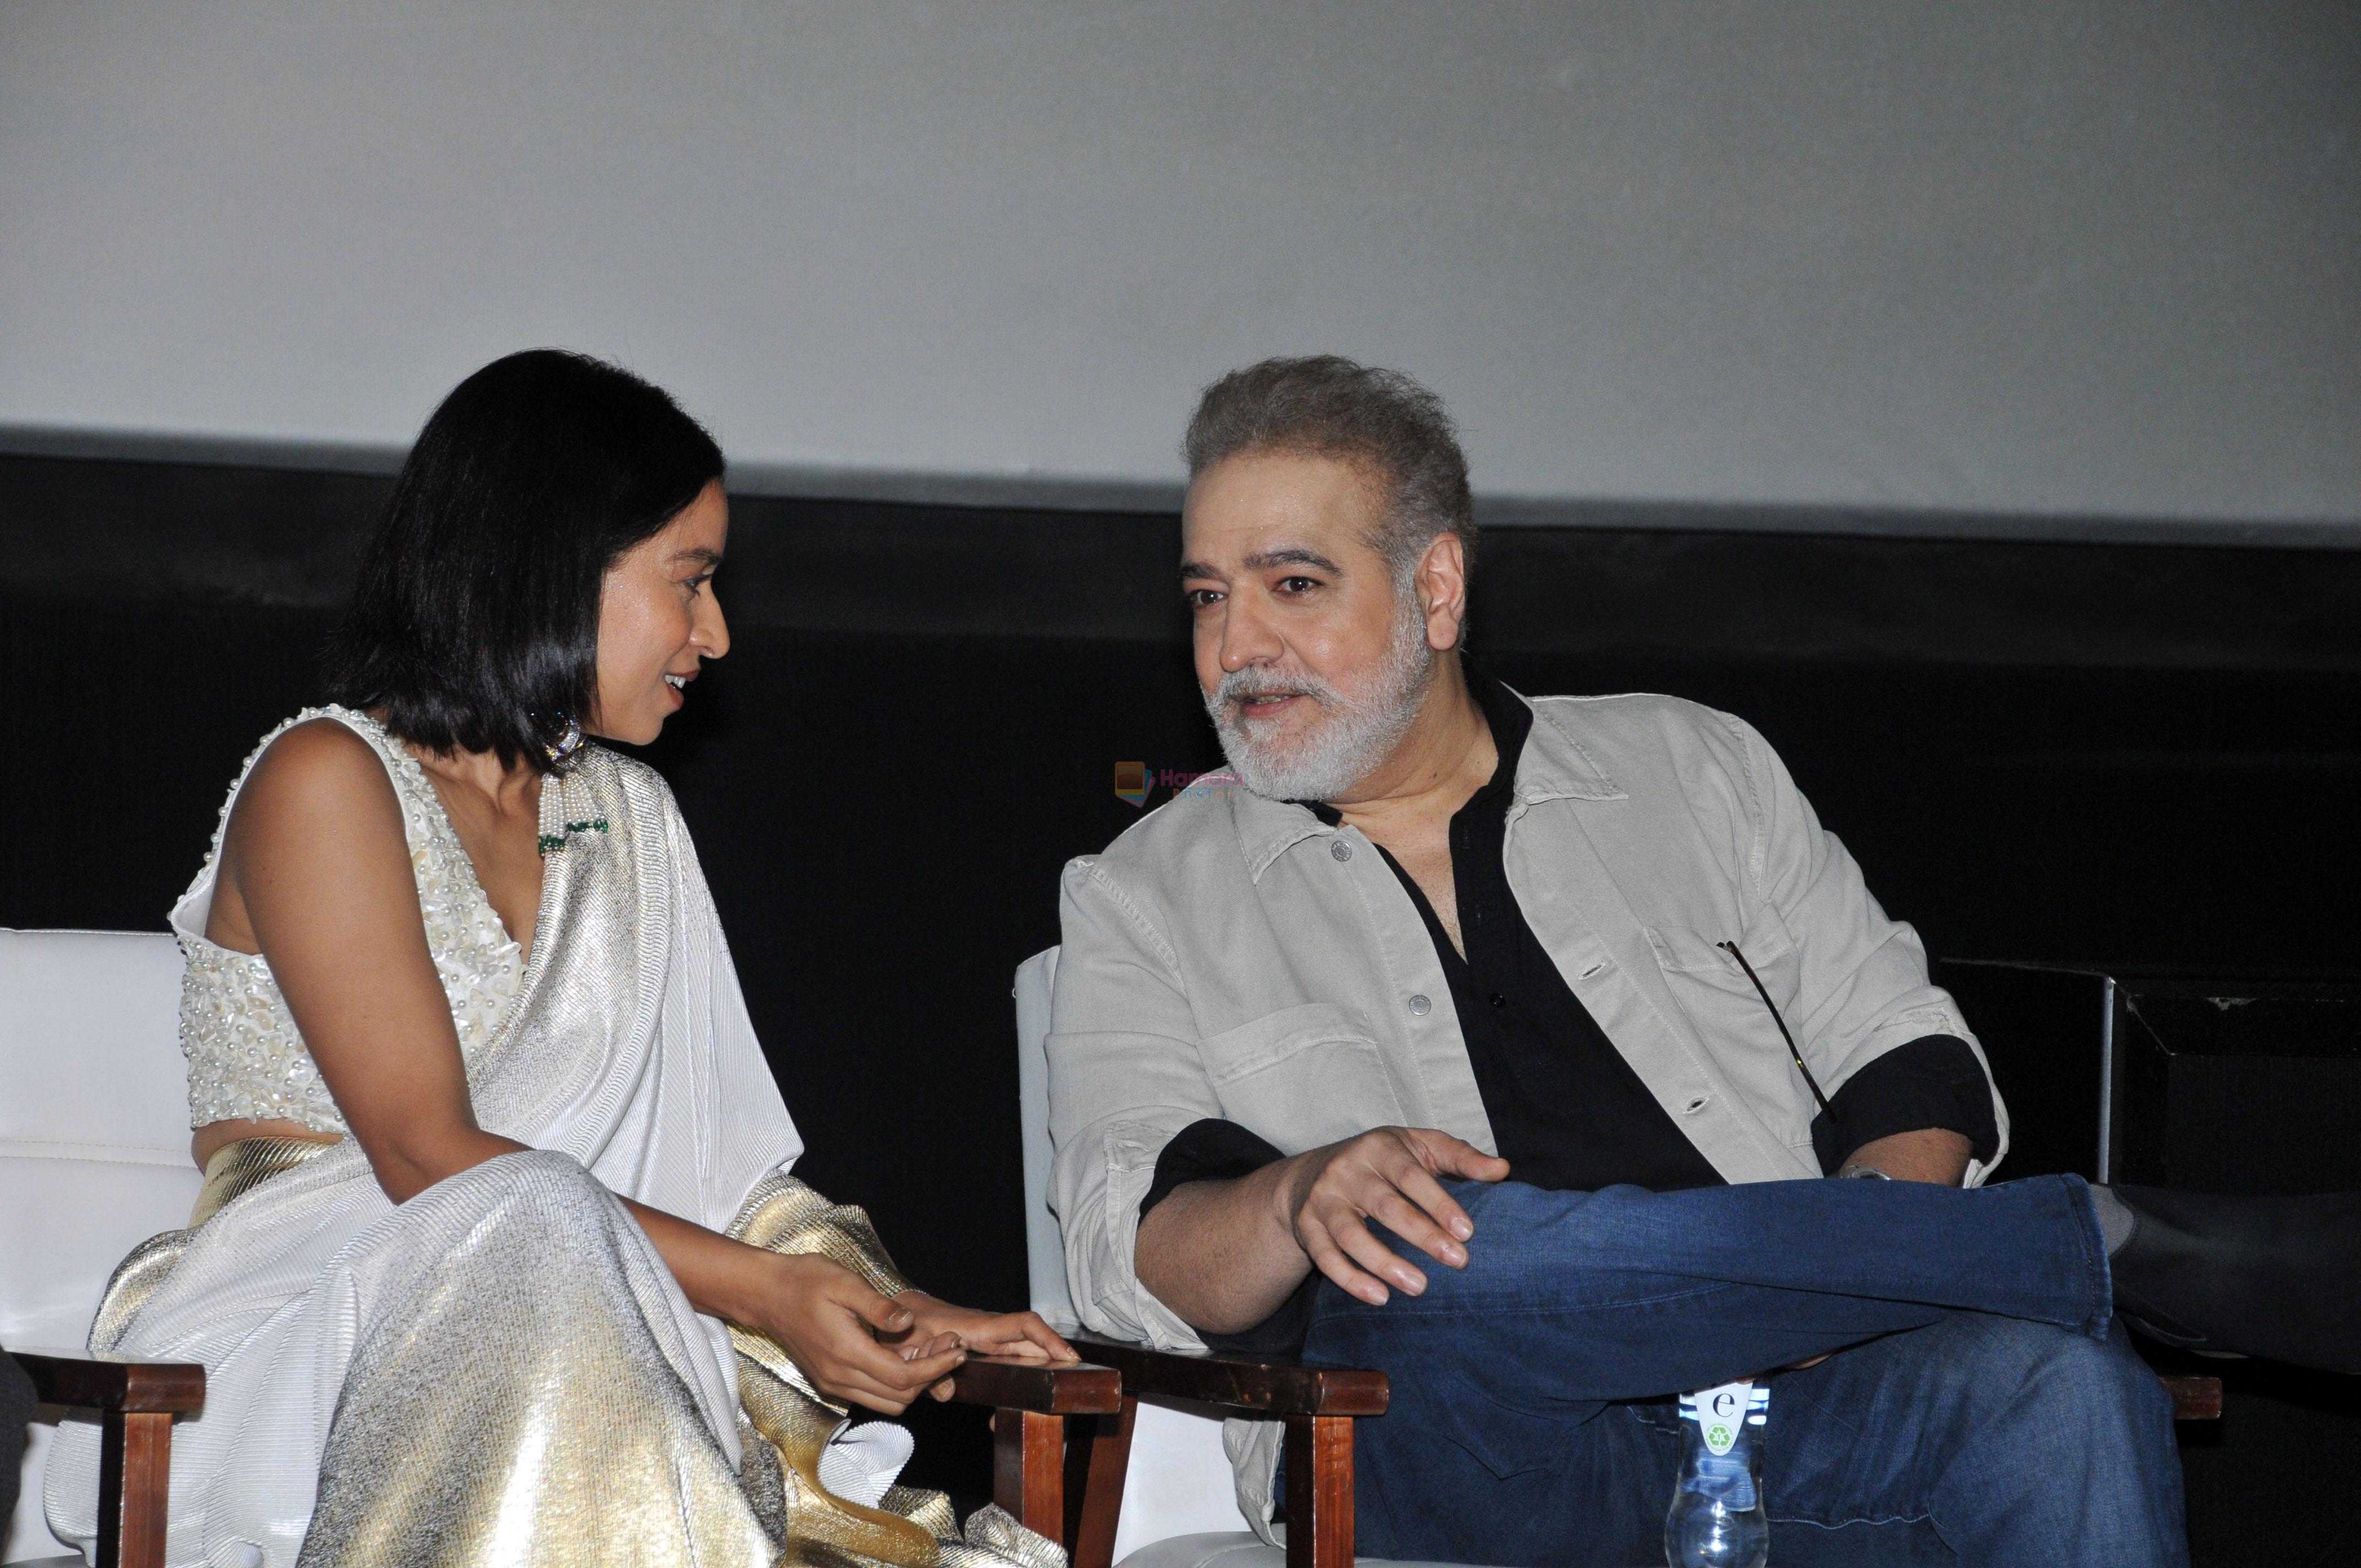 Tillotama Shome, Ravi Behl at the The Press Conference of The Night Manager Season 2 on 28 Jun 2023